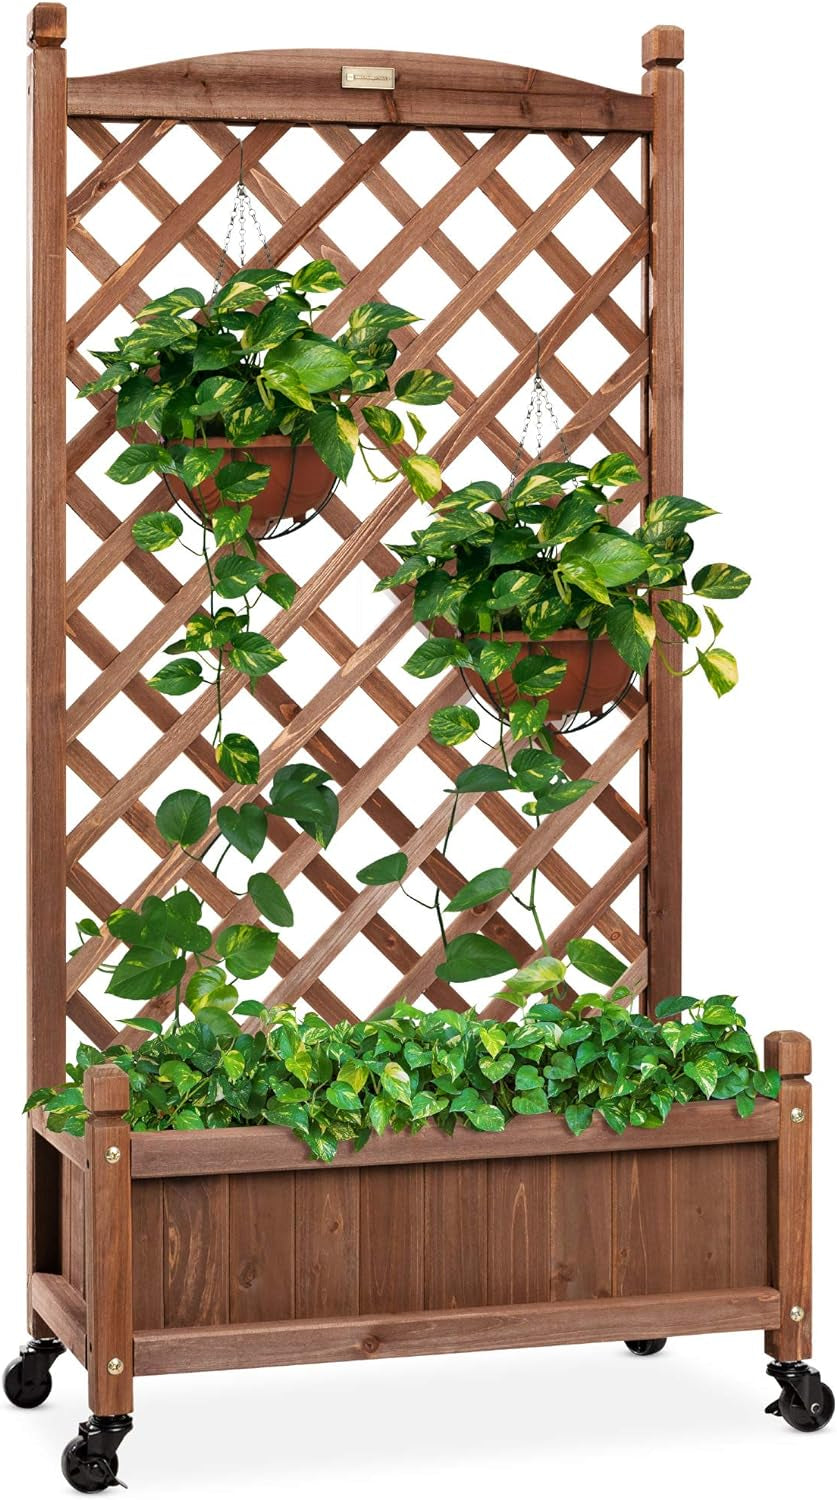 Best Choice Products 48In Wood Planter Box & Diamond Lattice Trellis, Mobile Outdoor Raised Garden Bed for Climbing Plants W/Drainage Holes, Optional Wheels - Walnut